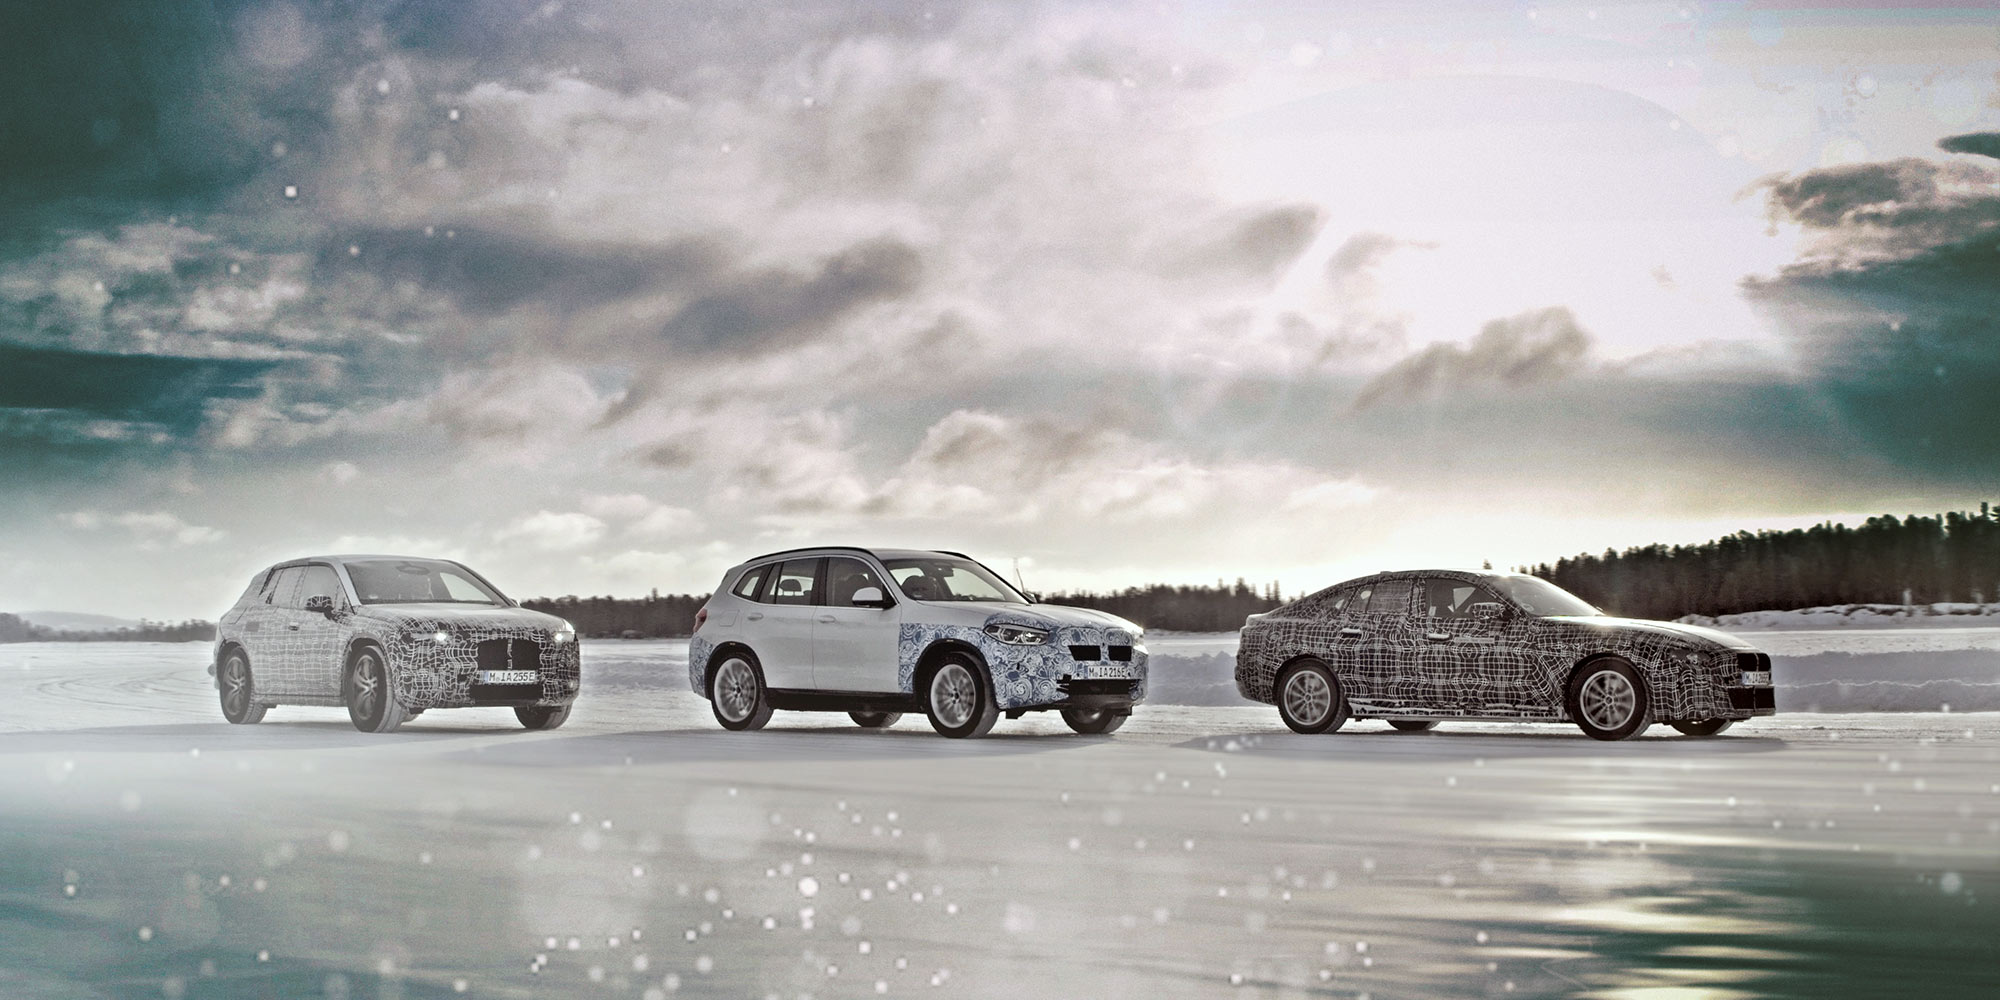 BMW iNEXT, BMW iX3, and BMW i4 in winter testing in 2019